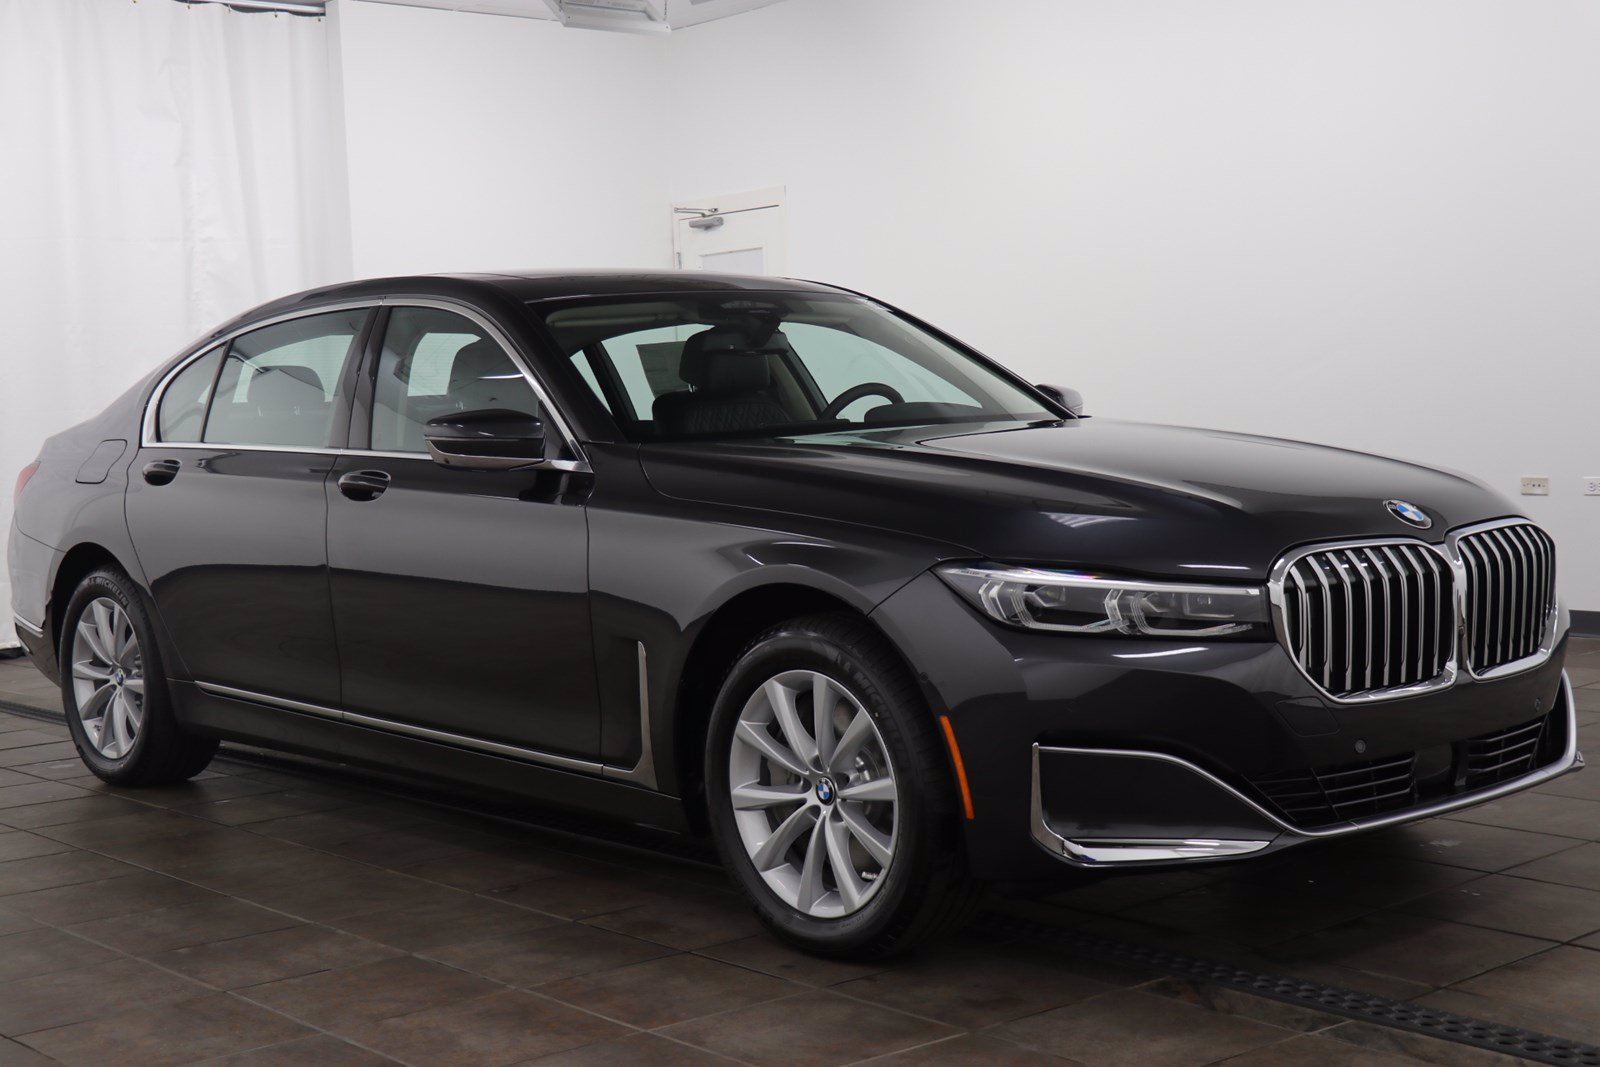 Pre-Owned 2020 BMW 7 Series 745e xDrive iPerformance 4dr Car in